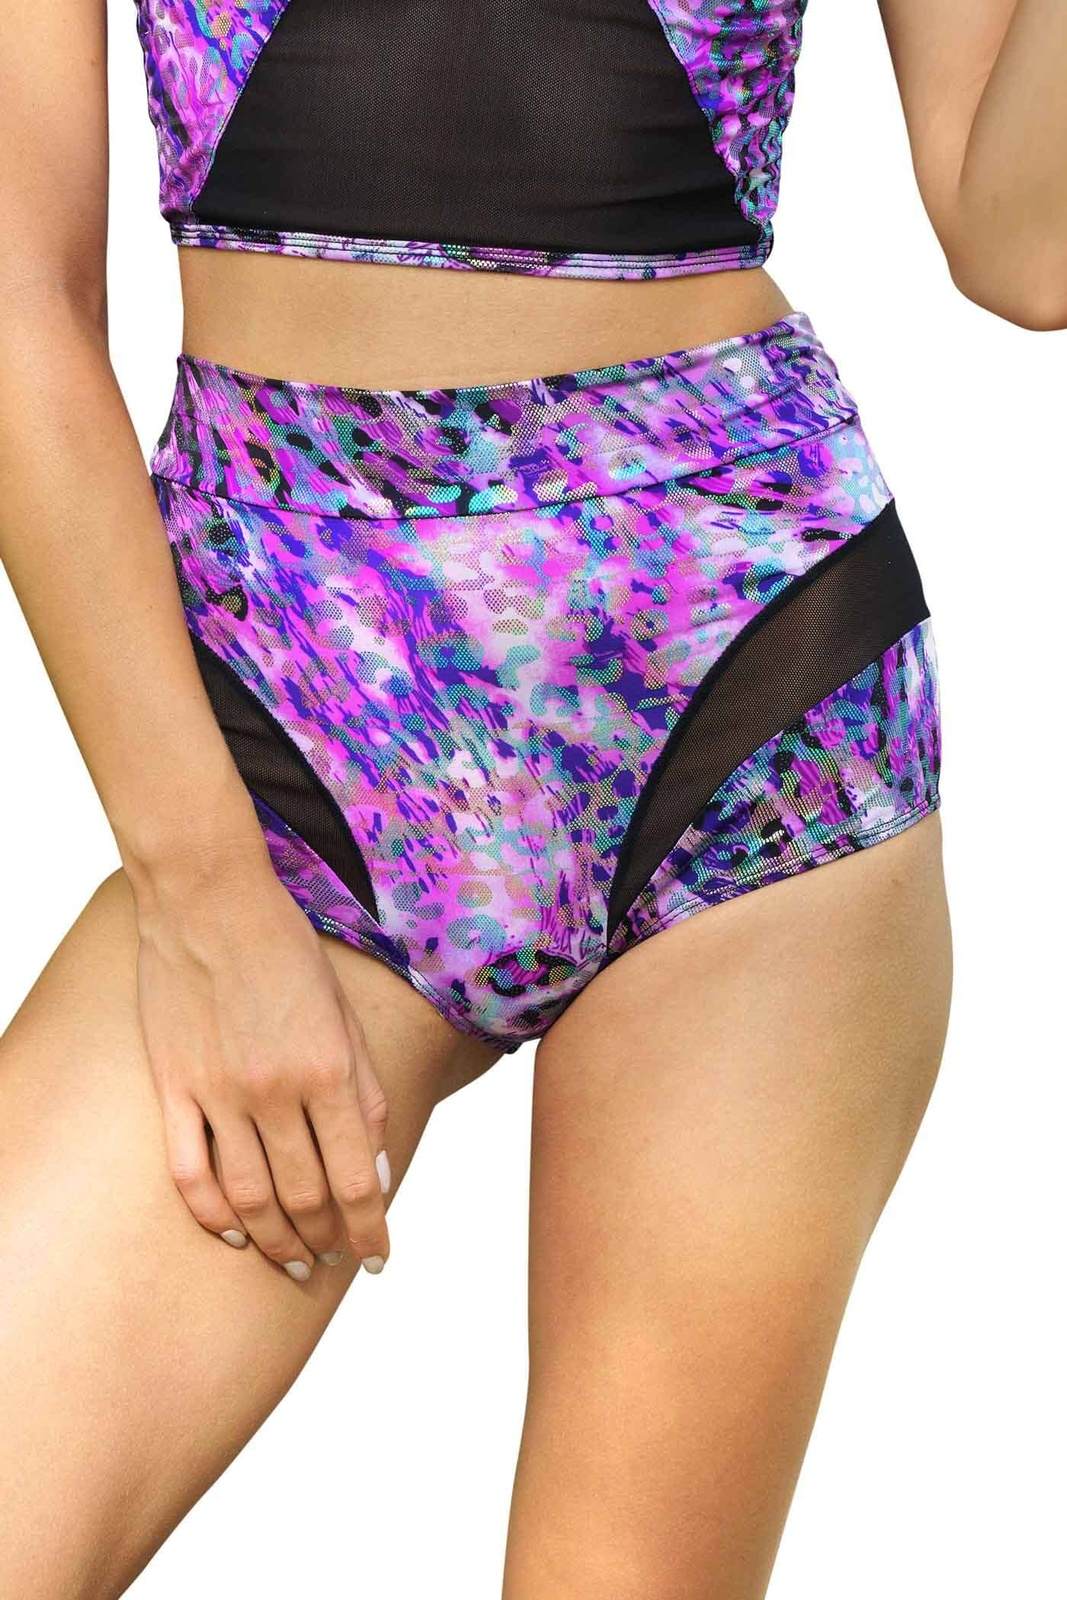 Ooh La La Purple High Waisted Booty Shorts from Love Khaos Rave outfit website